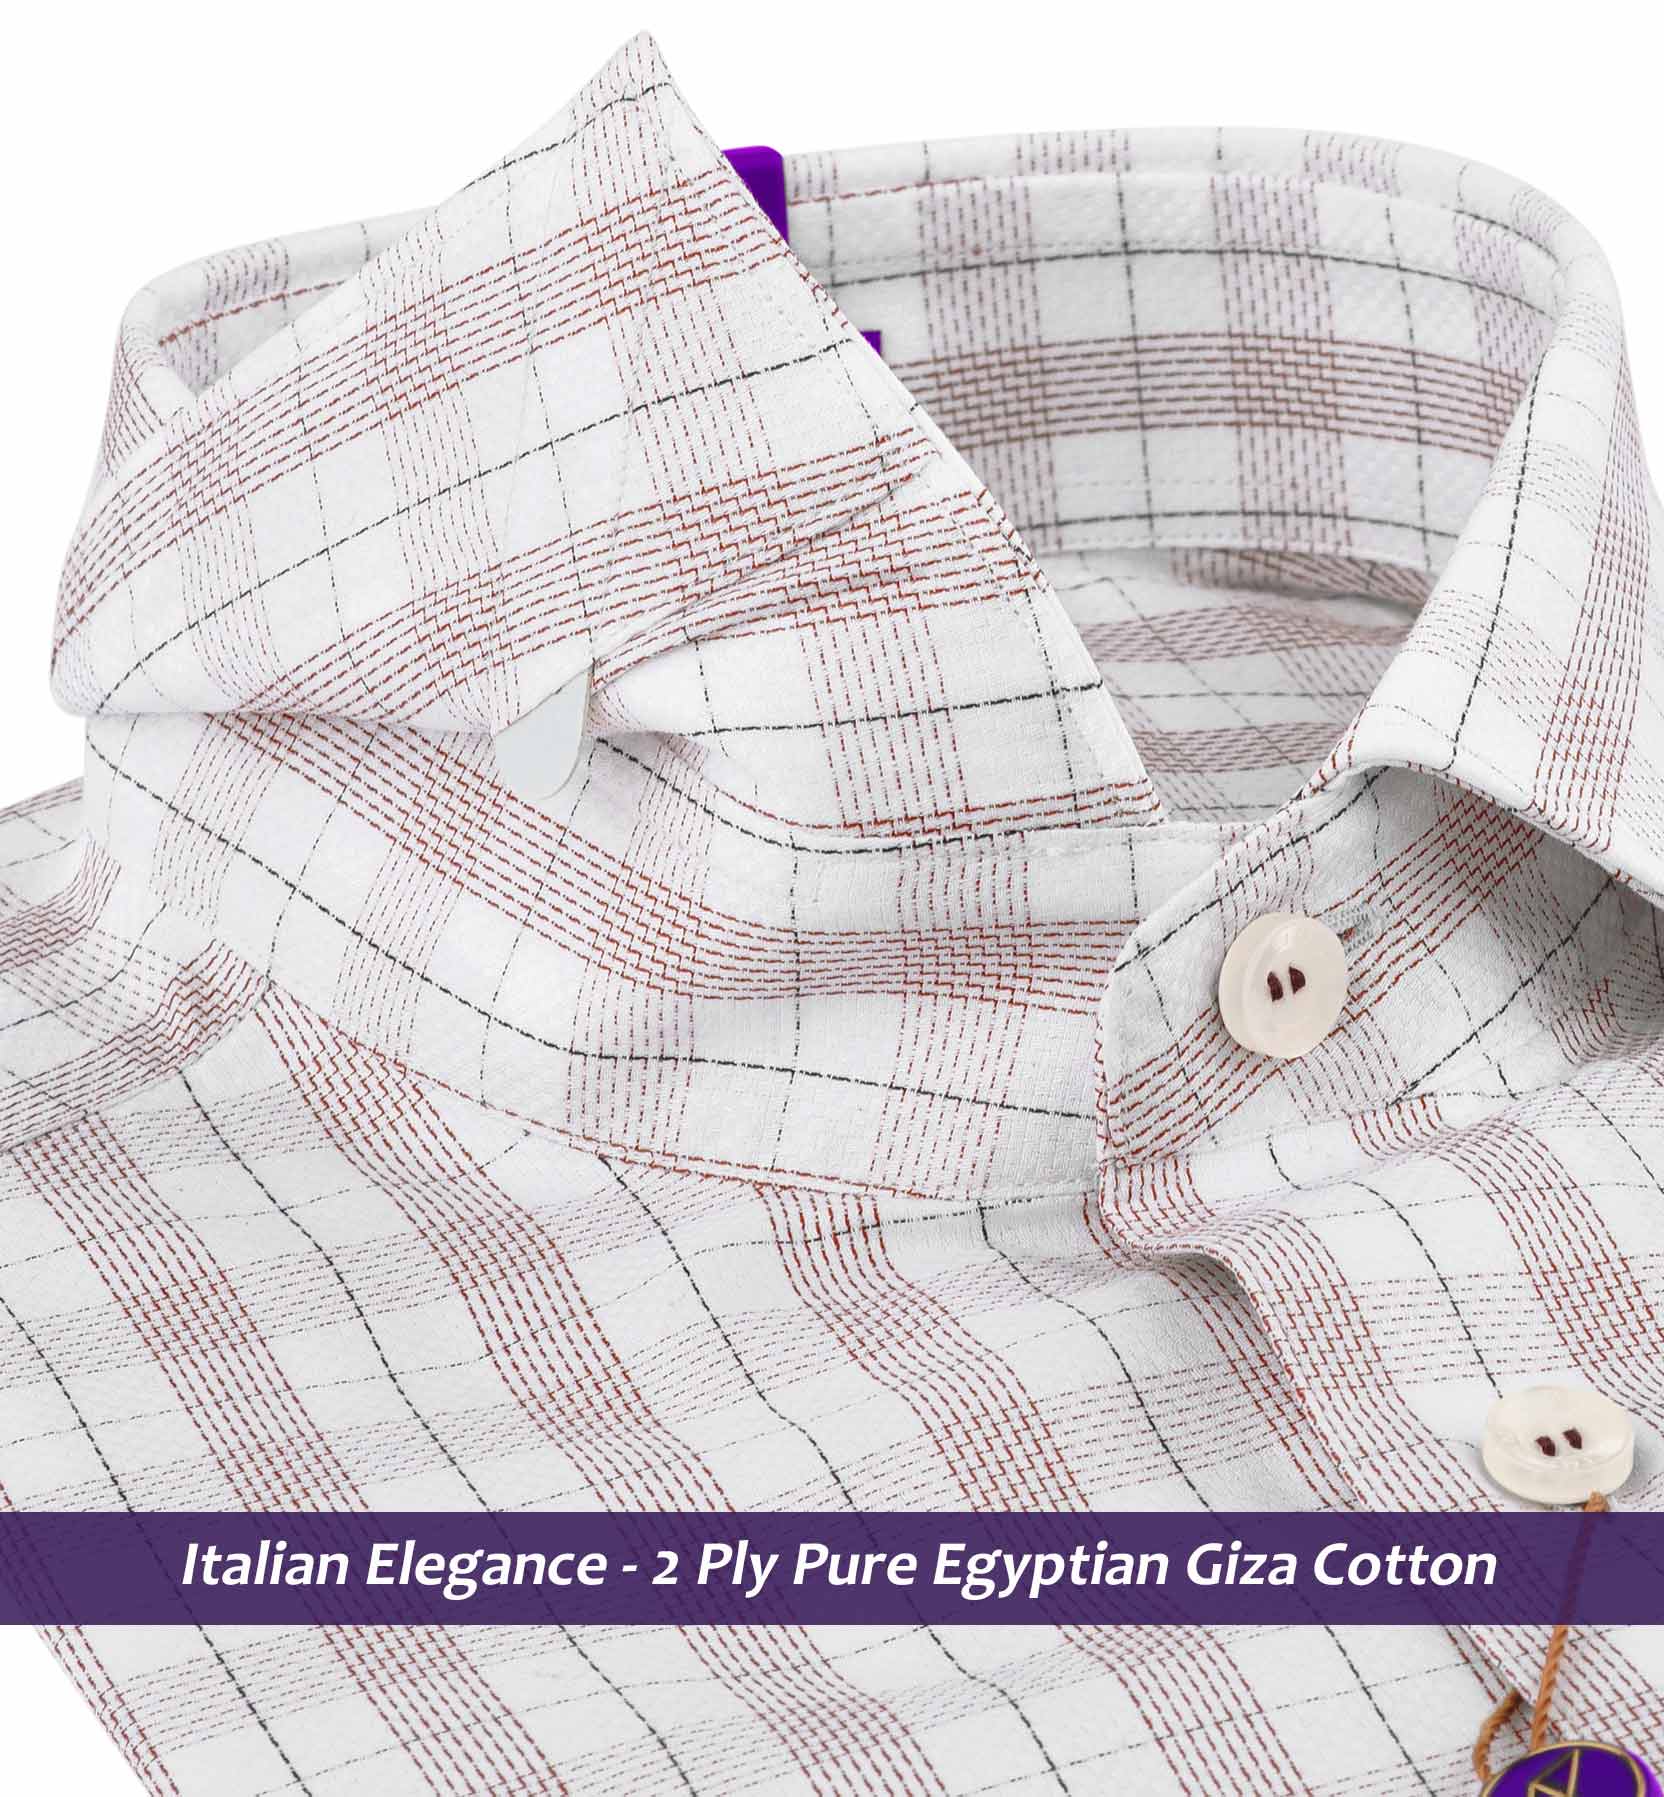 Cuenca- Mulberry Burgundy & White Check